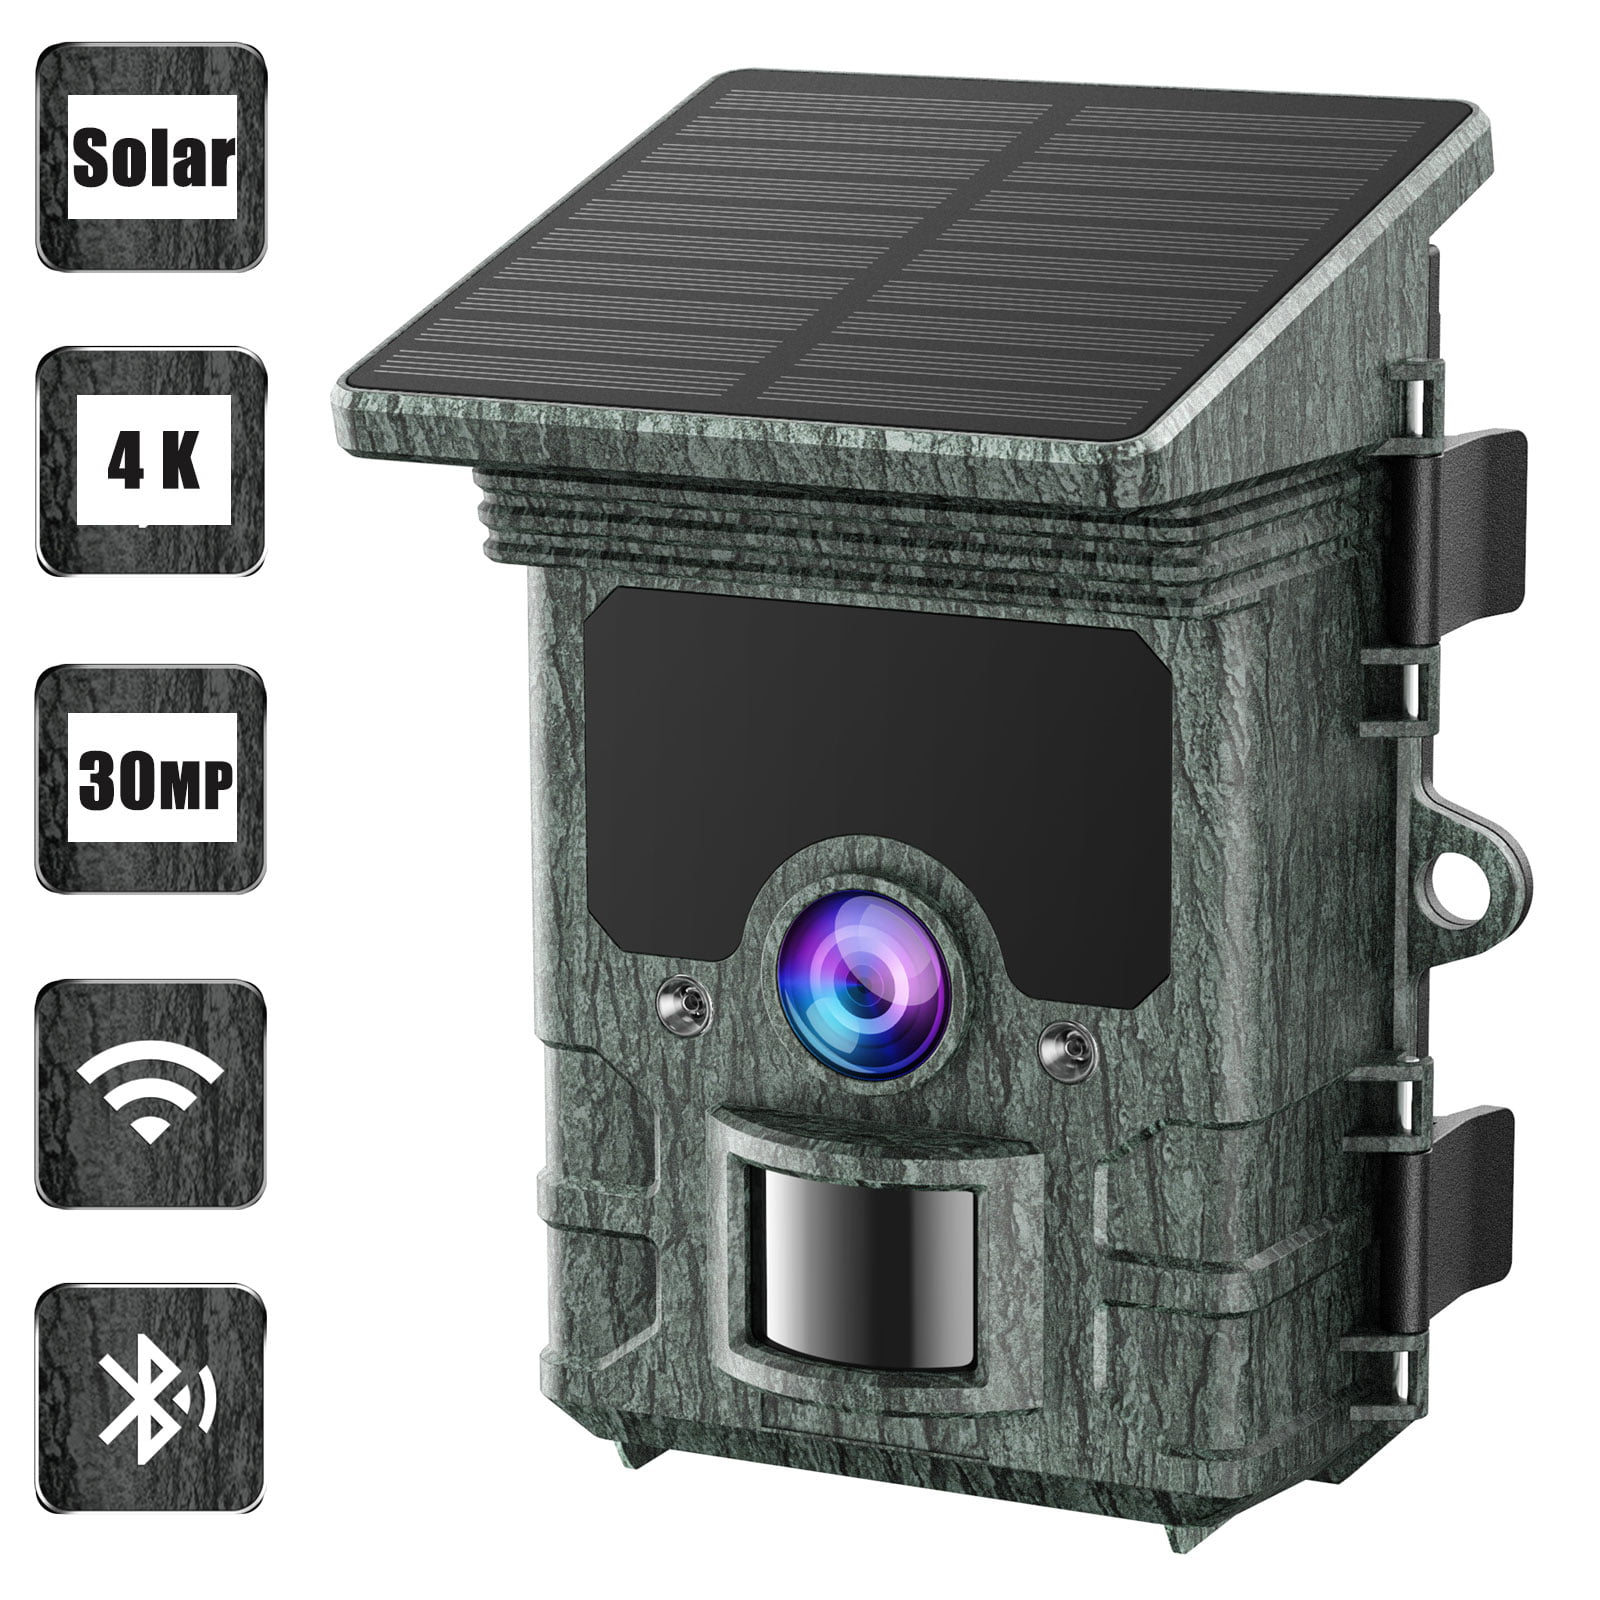 Details about   Campark 4K WiFi Solar Trail Camera 30MP 2160P Bluetooth Hunting Game Video Cam 